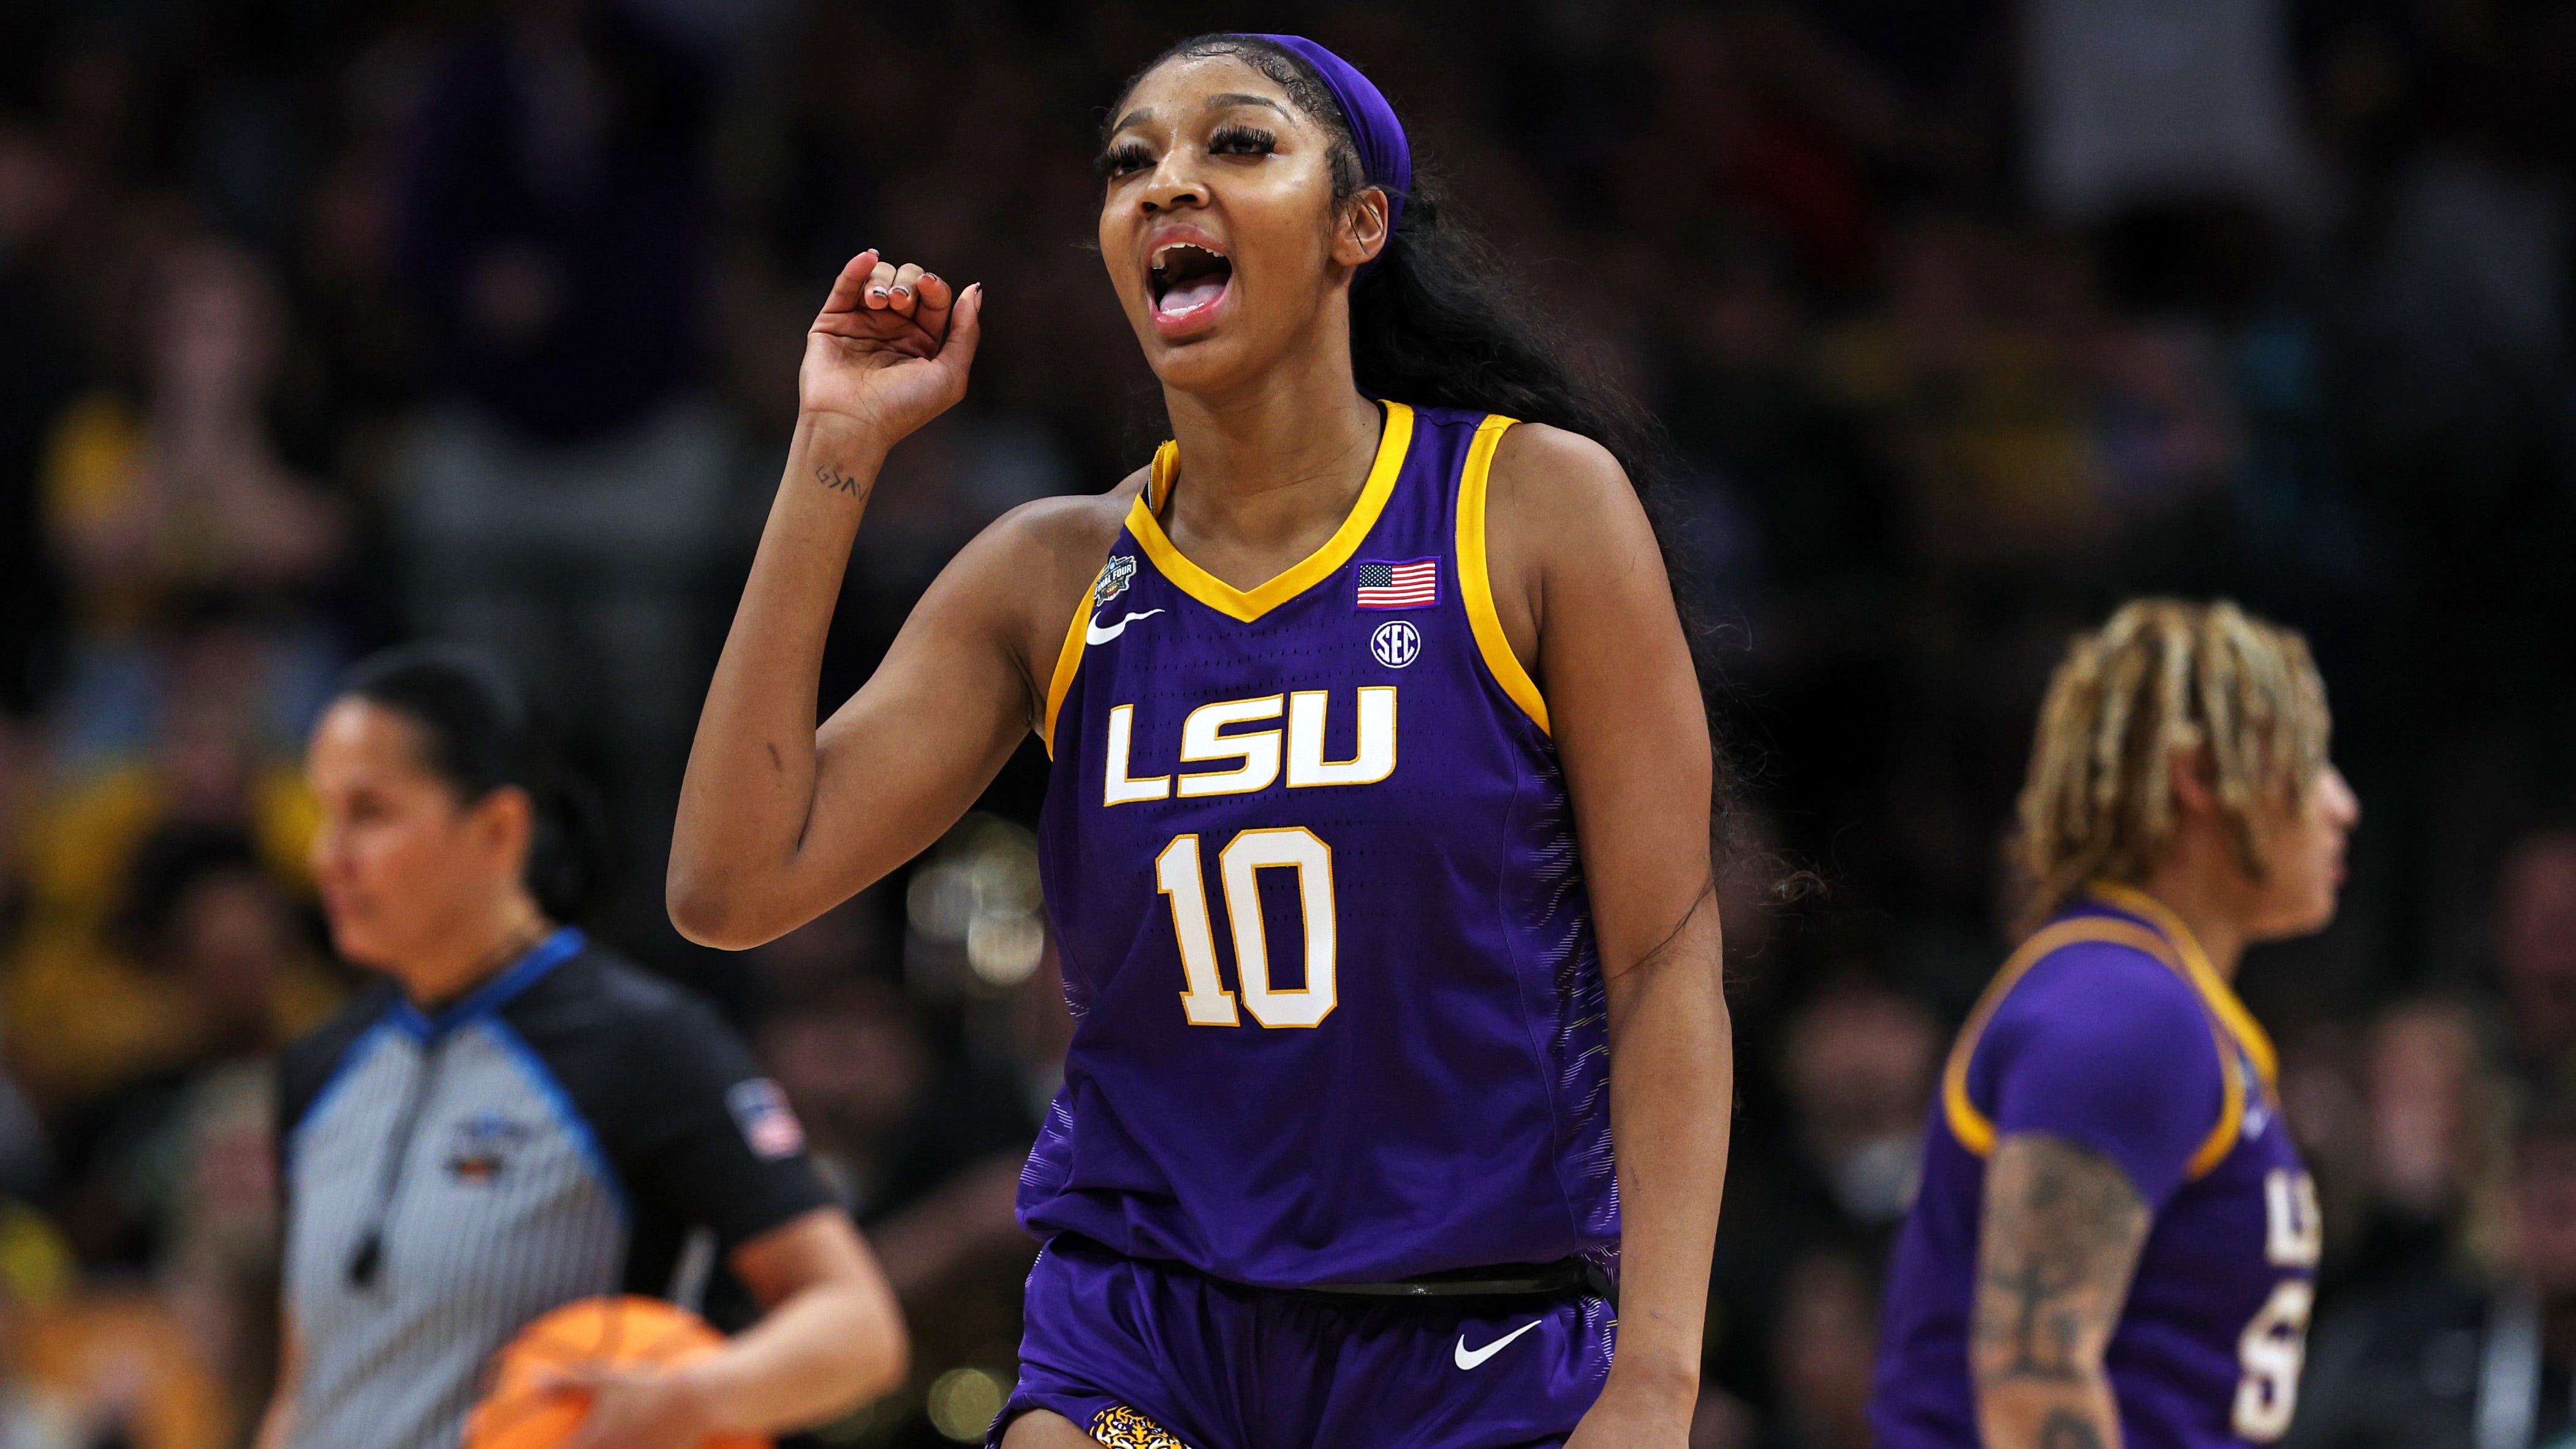 Center Angel Reese scored 15 points, pulled down 10 rebounds and was named the Final Four's Most Outstanding Player as LSU trounced Iowa in the women's national championship game.